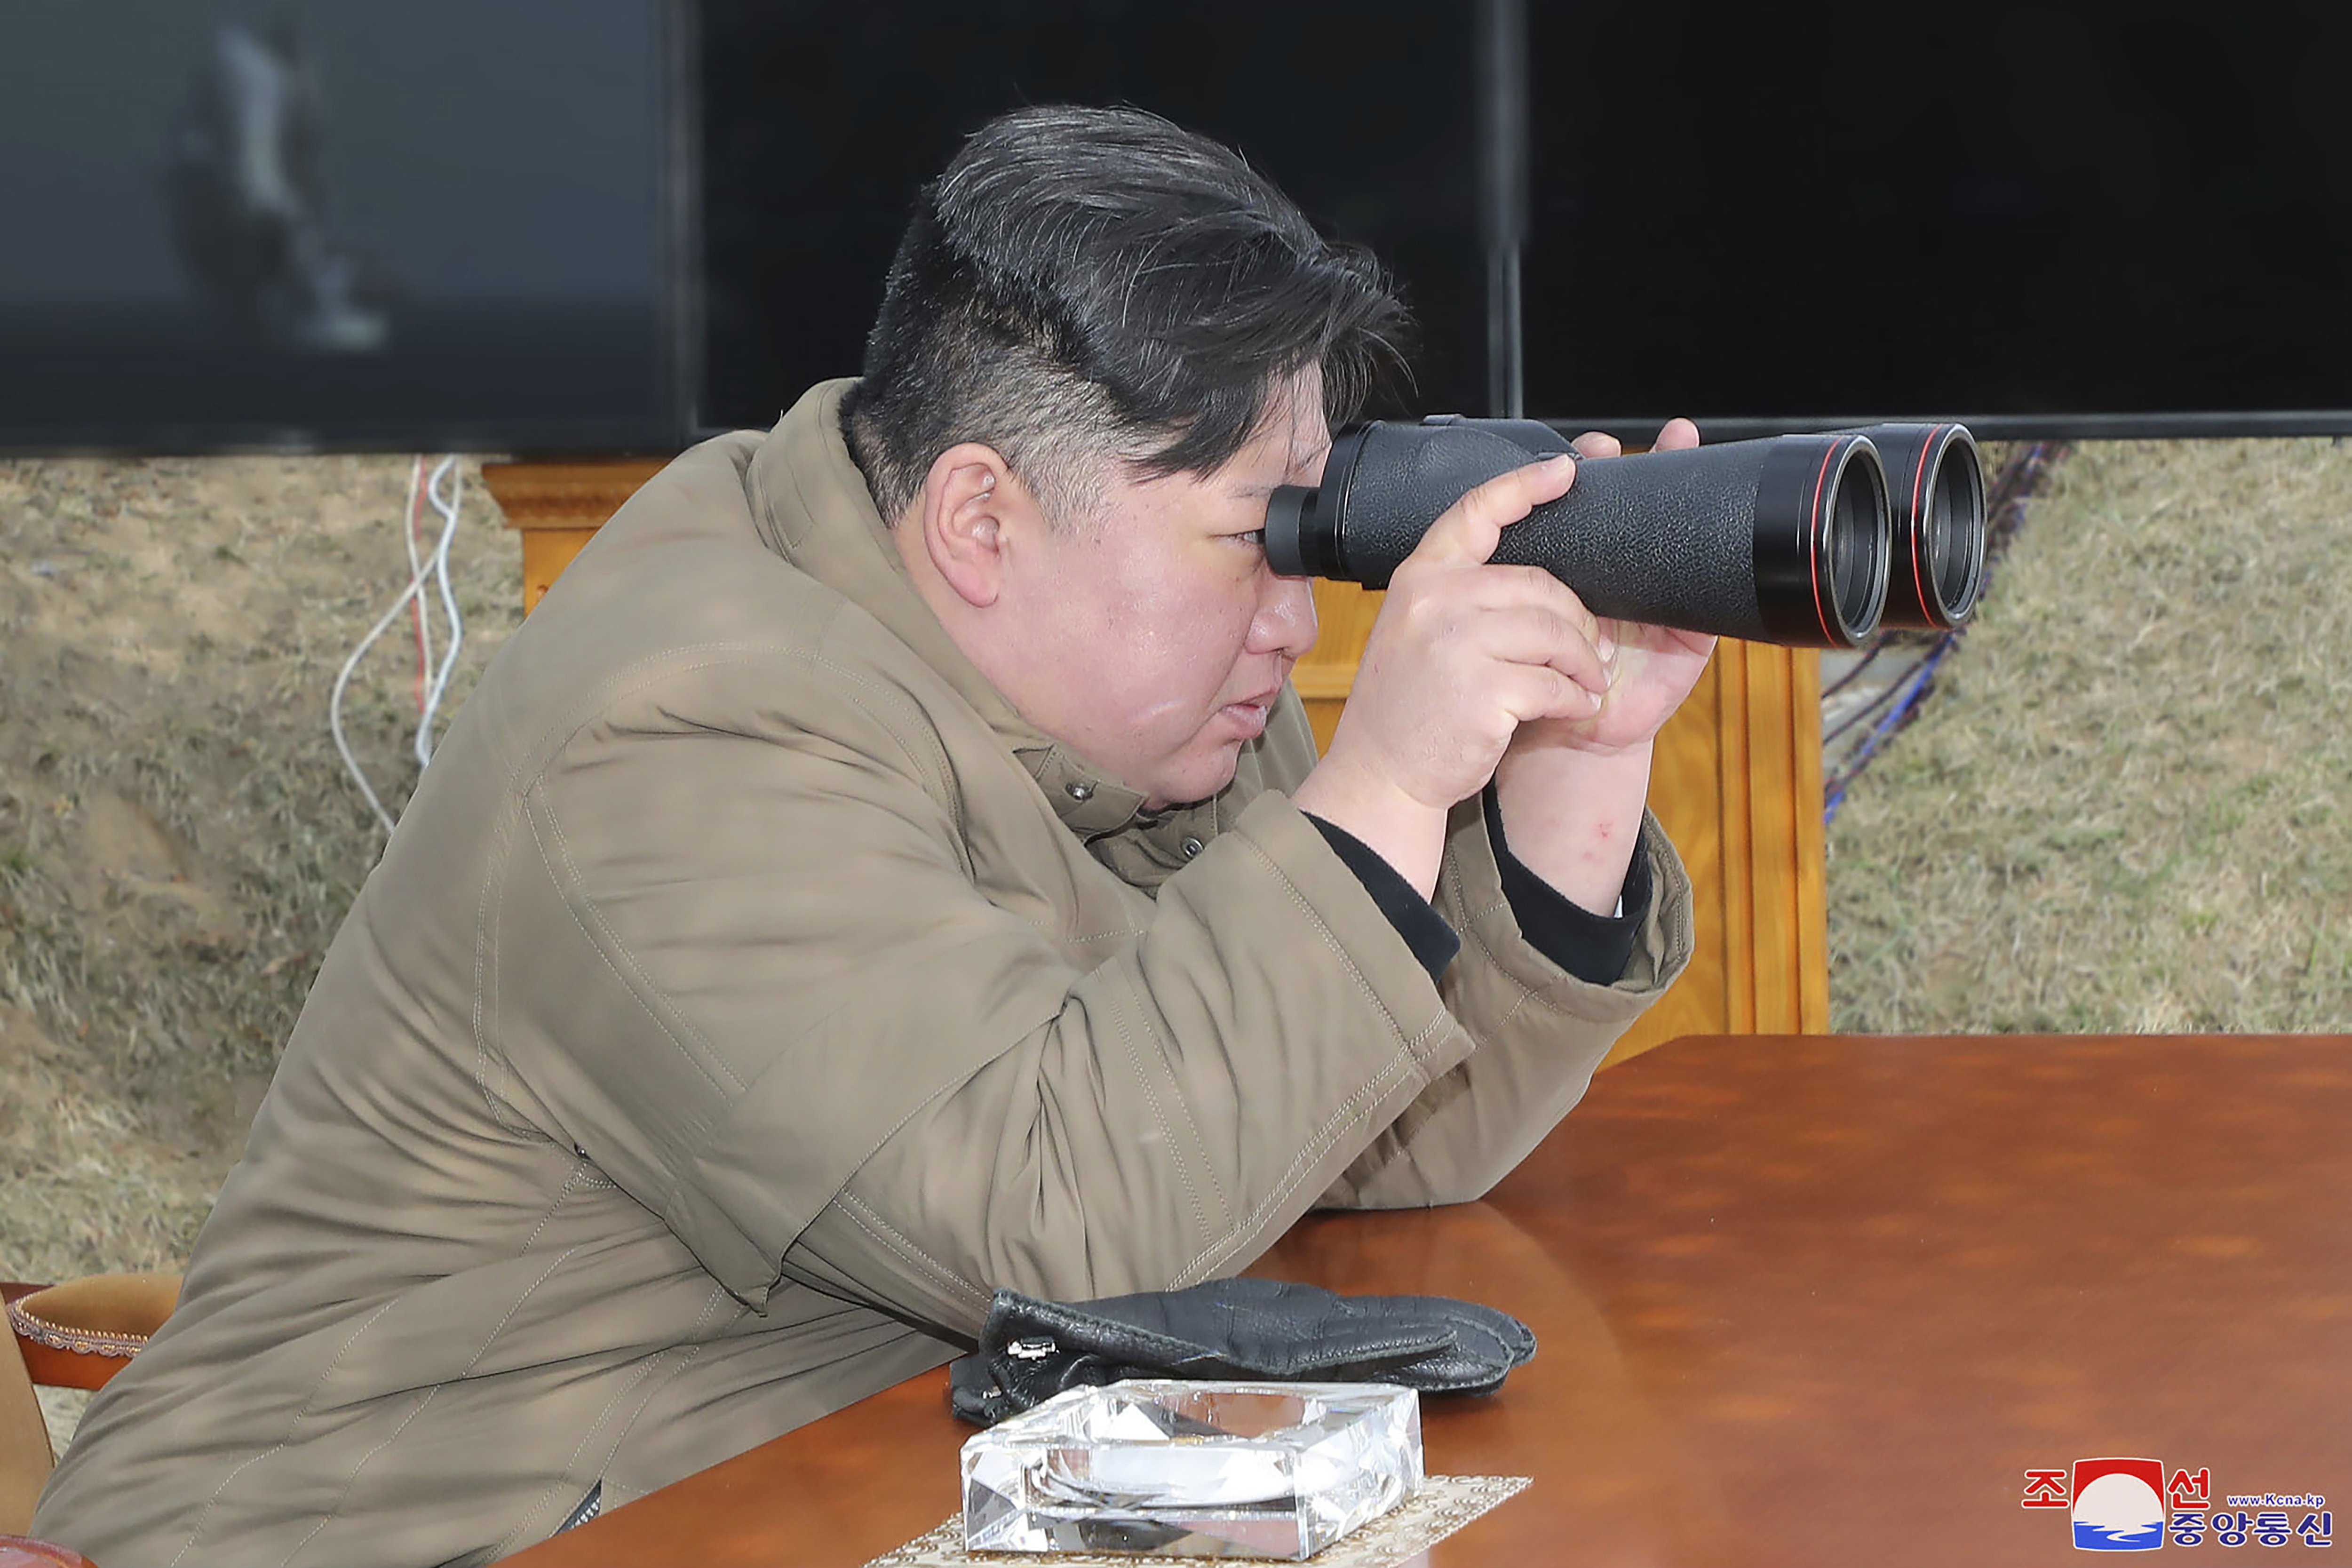 In this photo taken during March 21 - 23, 2023 and provided by the North Korean government, North Korean leader Kim Jong Un supervises an exercise in South Hamgyong province, North Korea. 